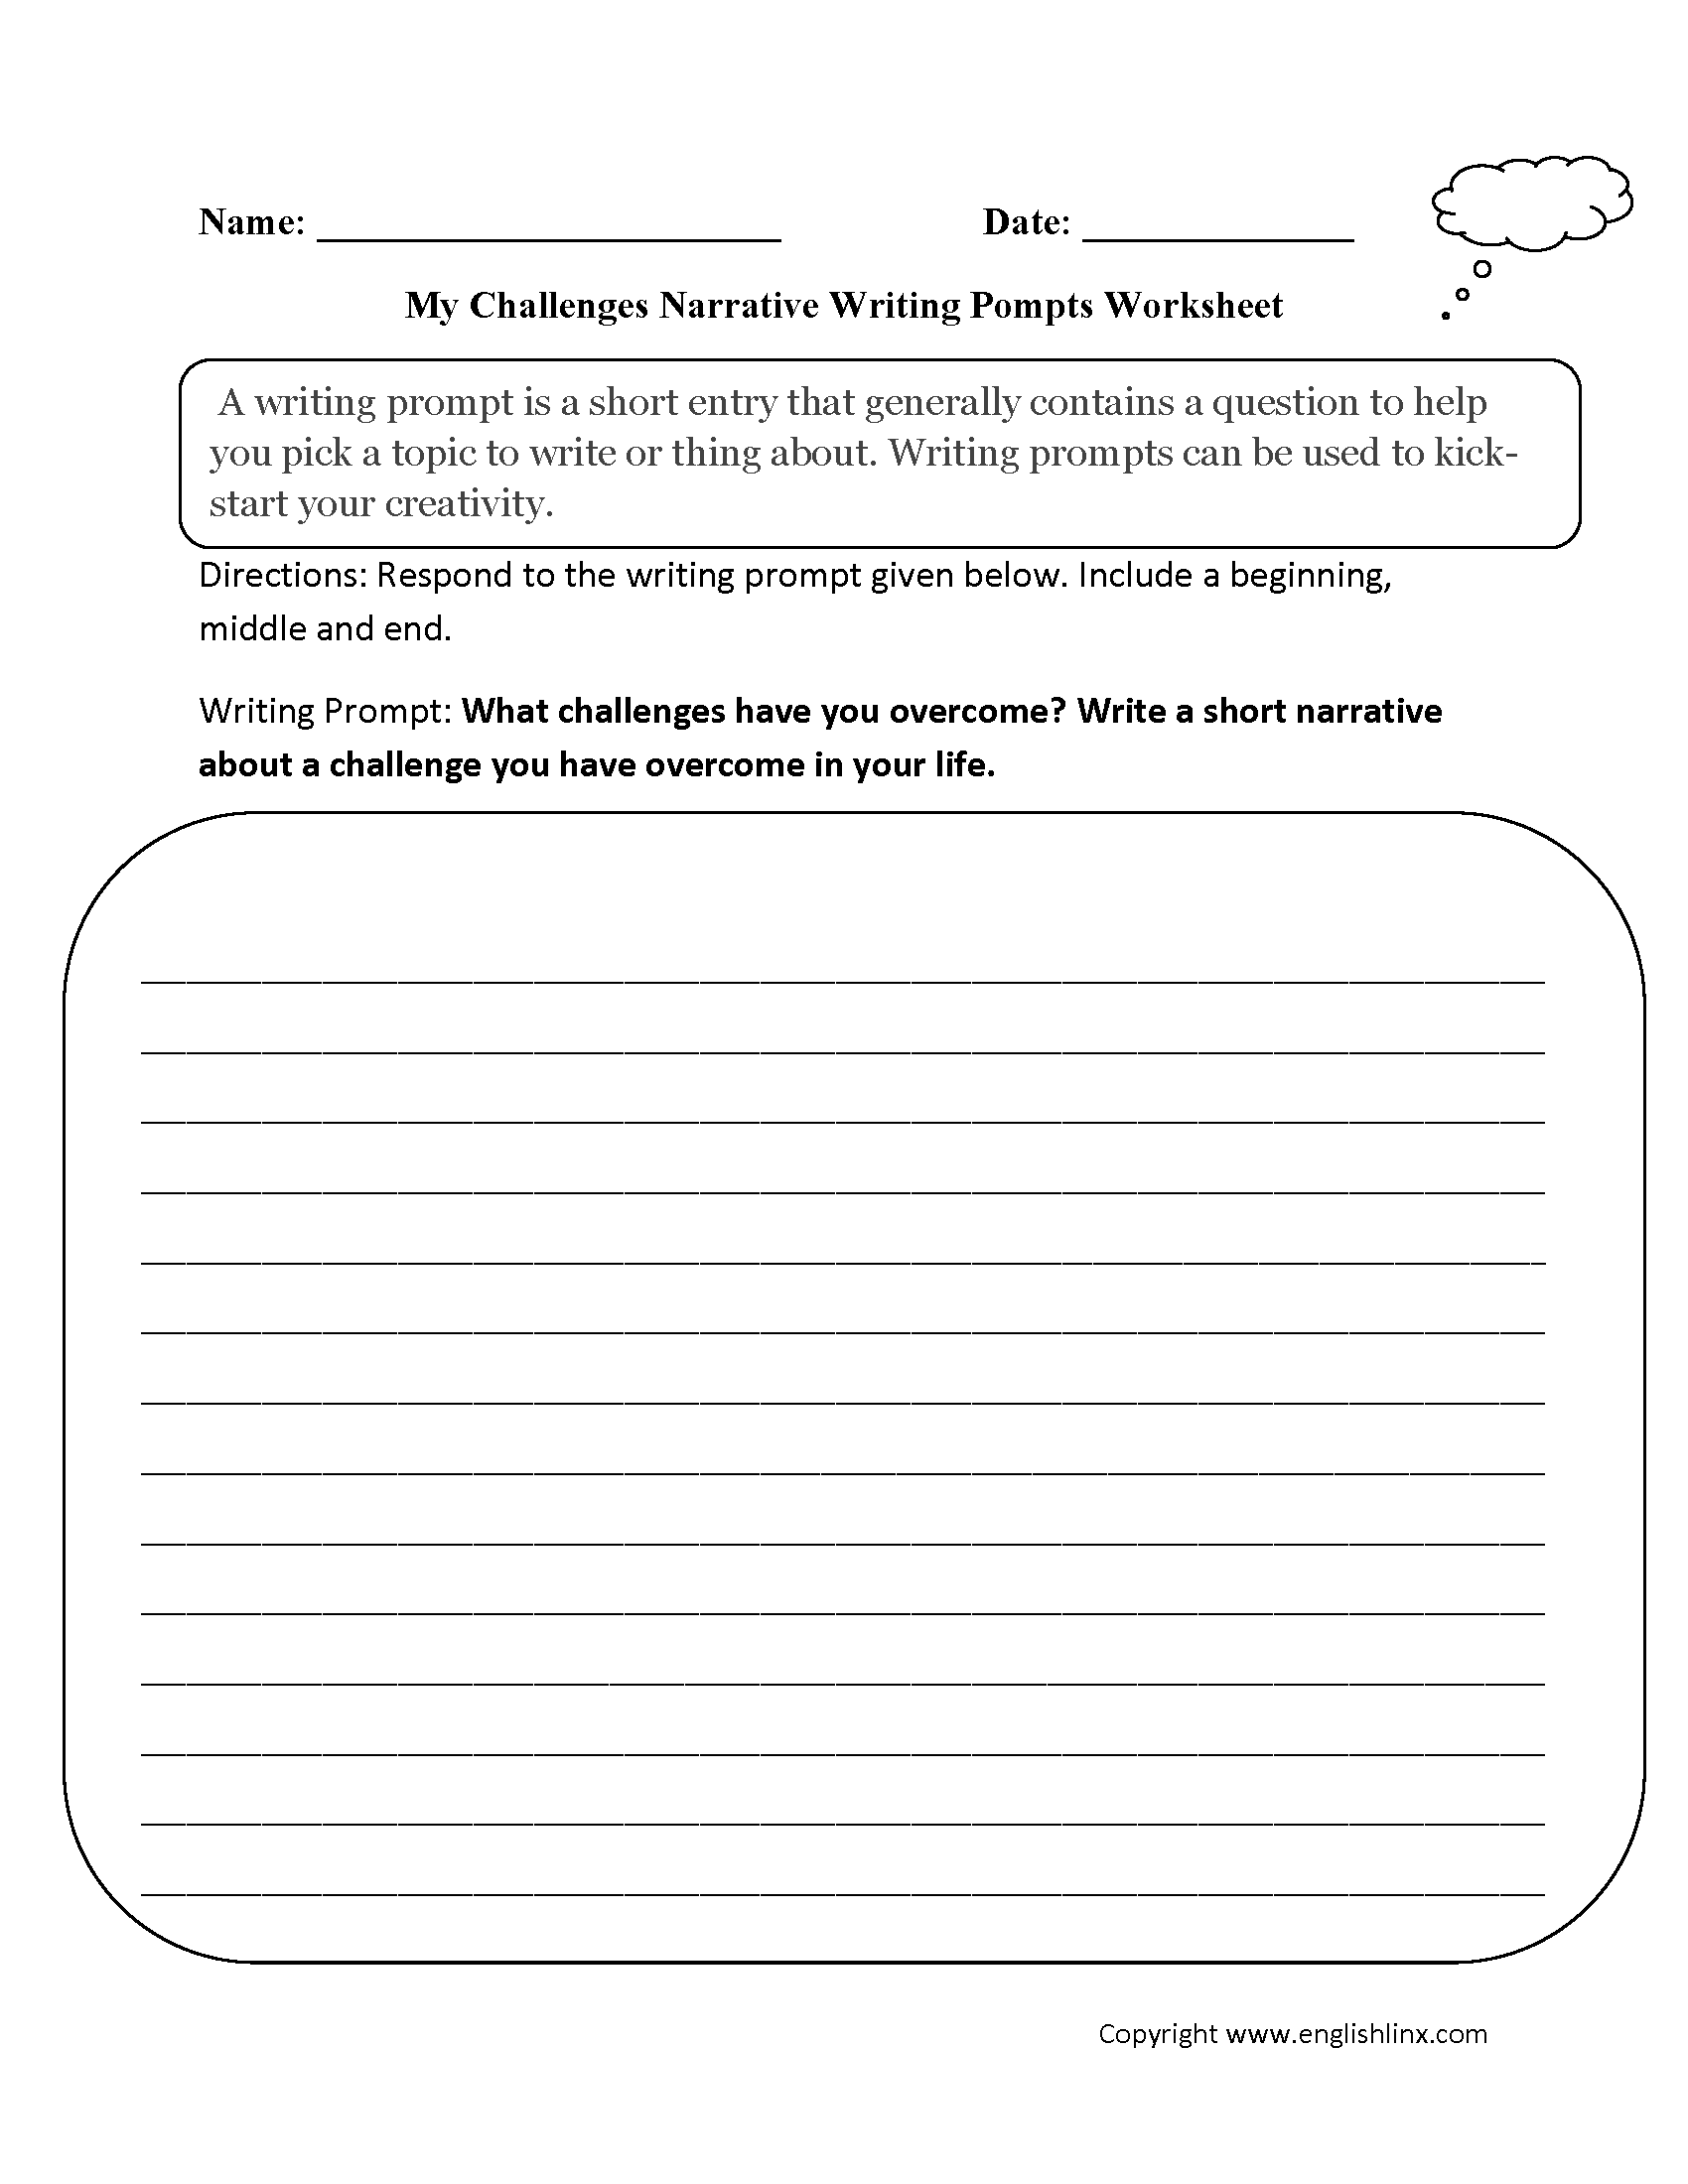 Challenges Narrative Writing Prompts Worksheets